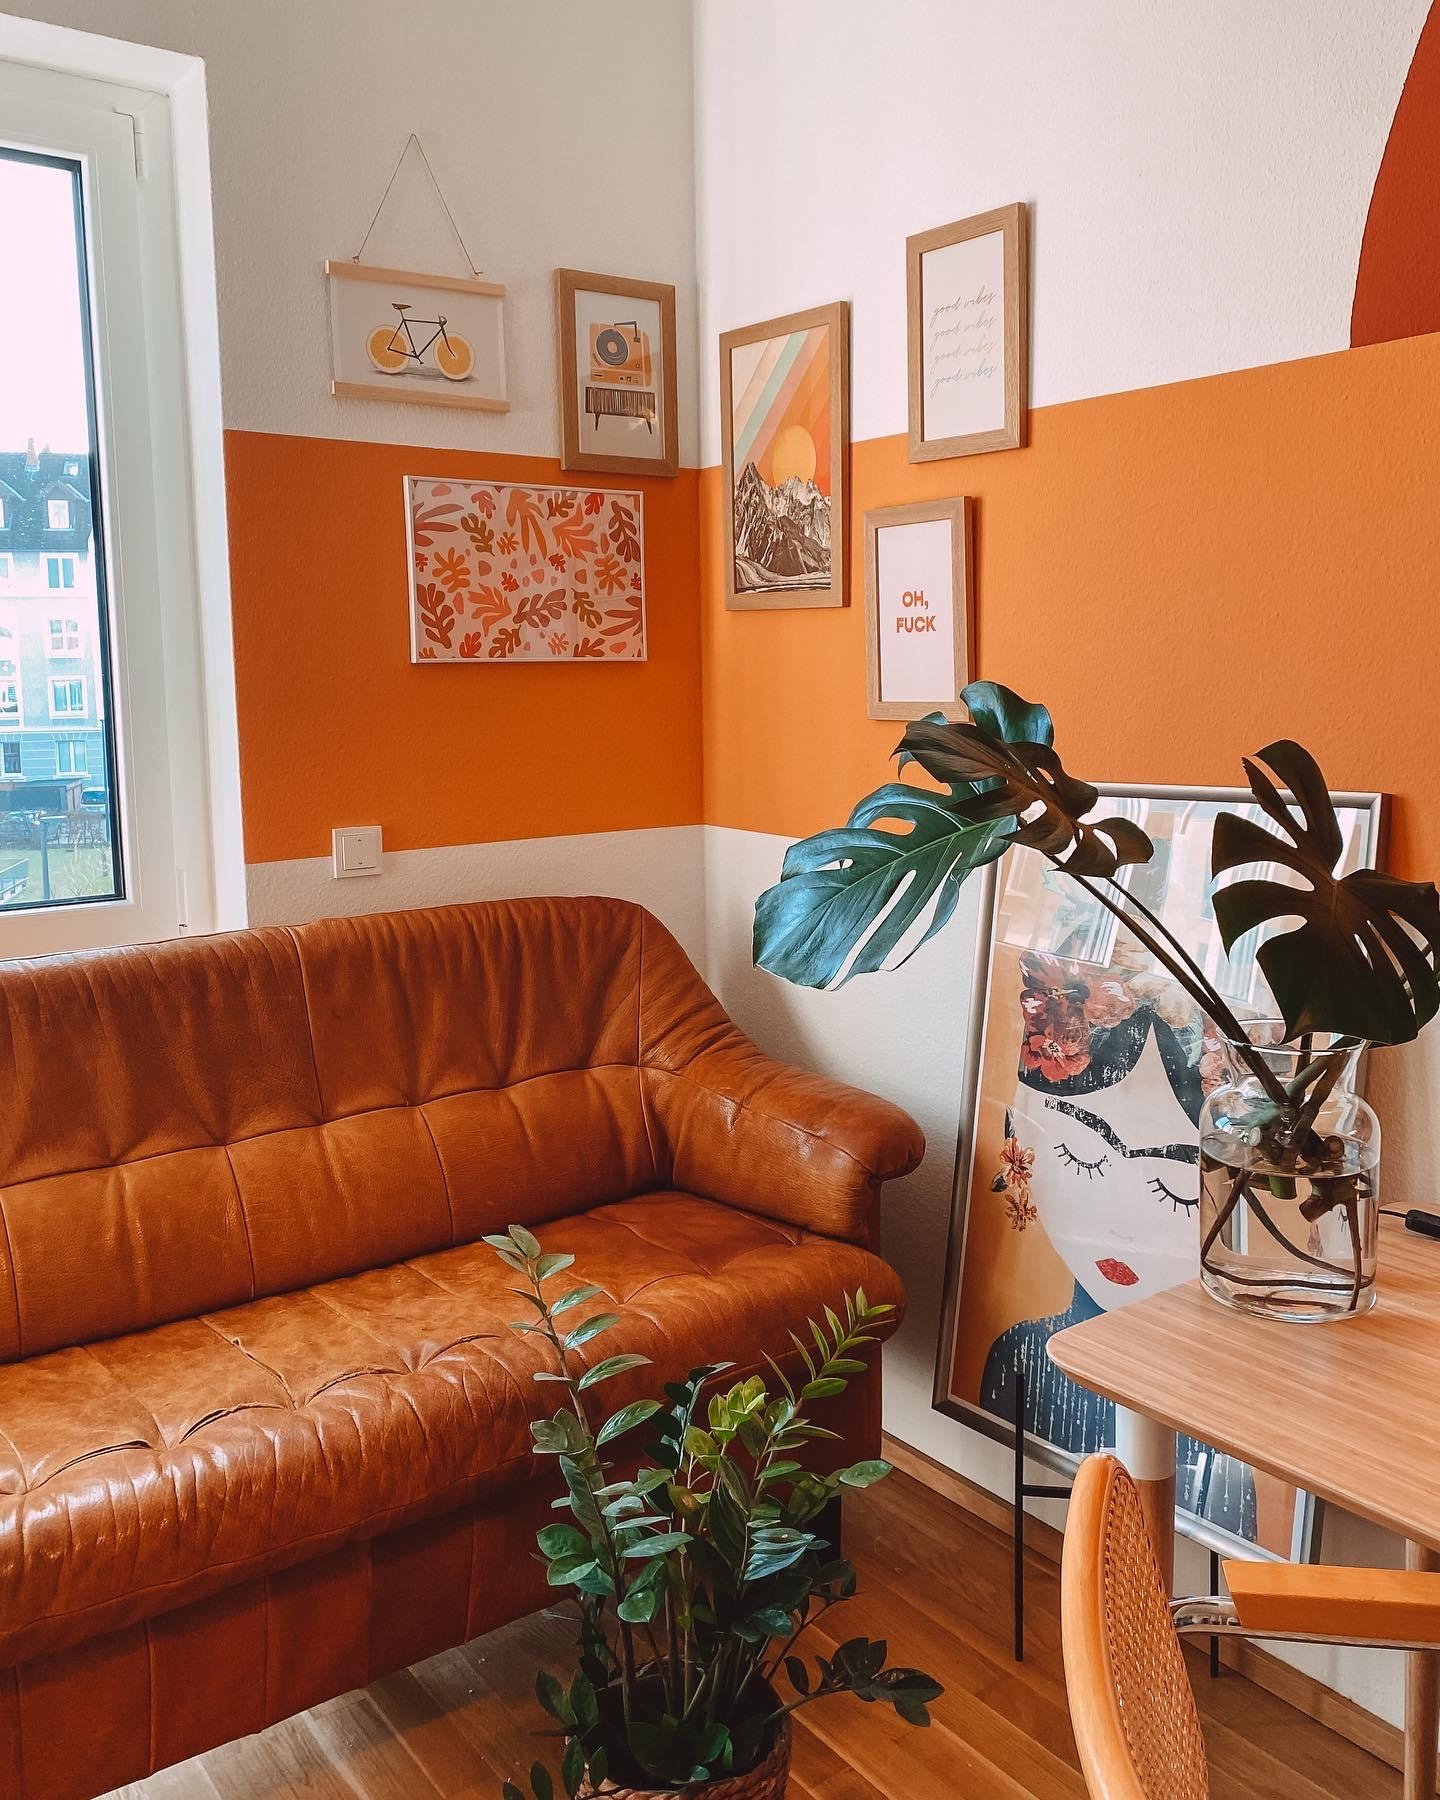 Officeview #homeoffice #70svibe #colorfulliving